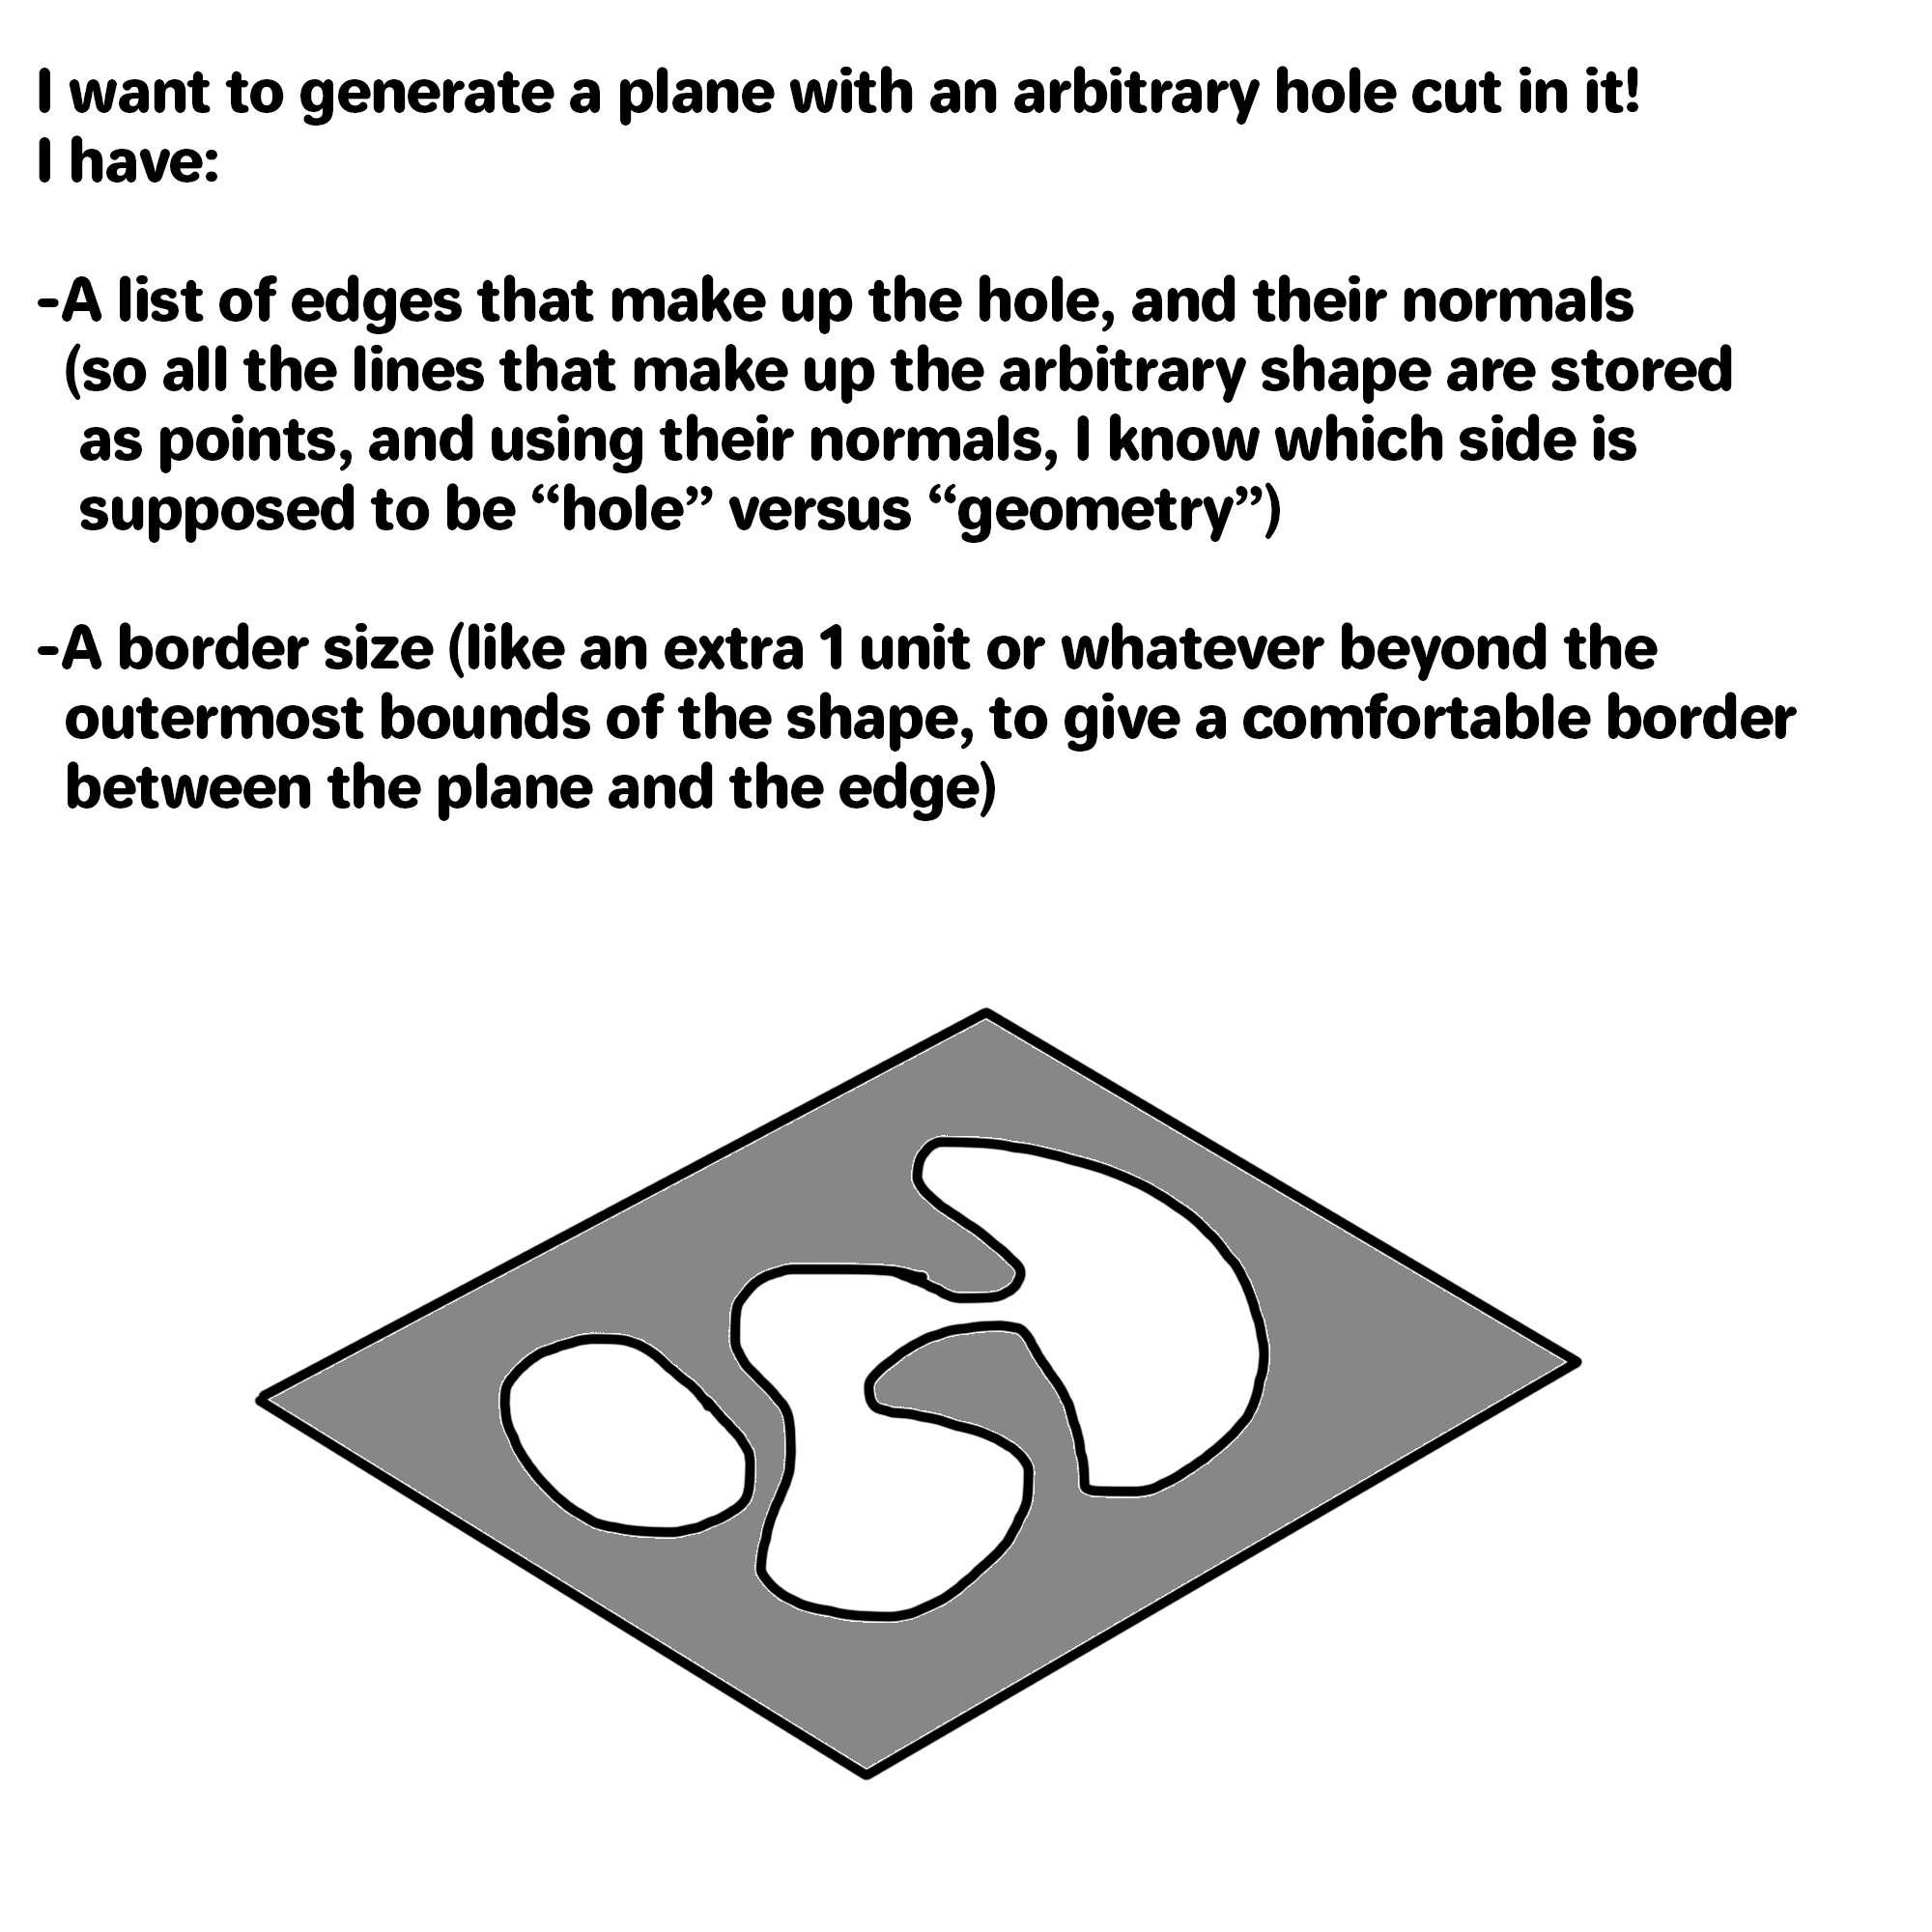 I want to generate a plane with an arbitrary hole cut in it. I have a list of edges that make up their hole, and their normals. I also have the size of the hole overall, plus a border size.